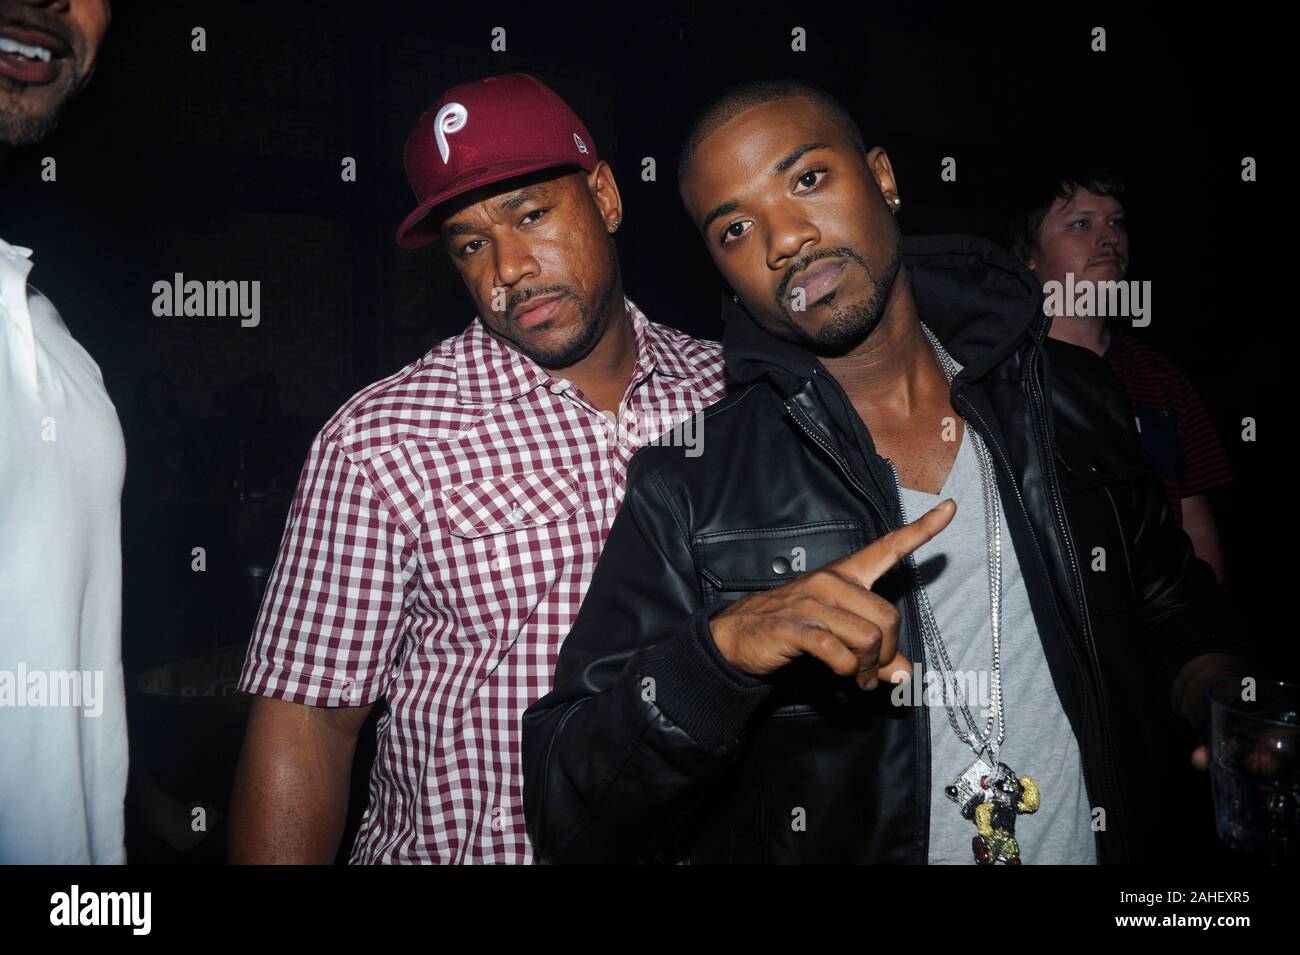 (L-R) Cash 'Wack100' Jones and Actor / Singer / Reality TV Star William Raymond Norwood Jr. aka Ray J on set of Ray J & Kid Ink 'Drinks In The Air' Music Video in Los Angeles, California. Stock Photo